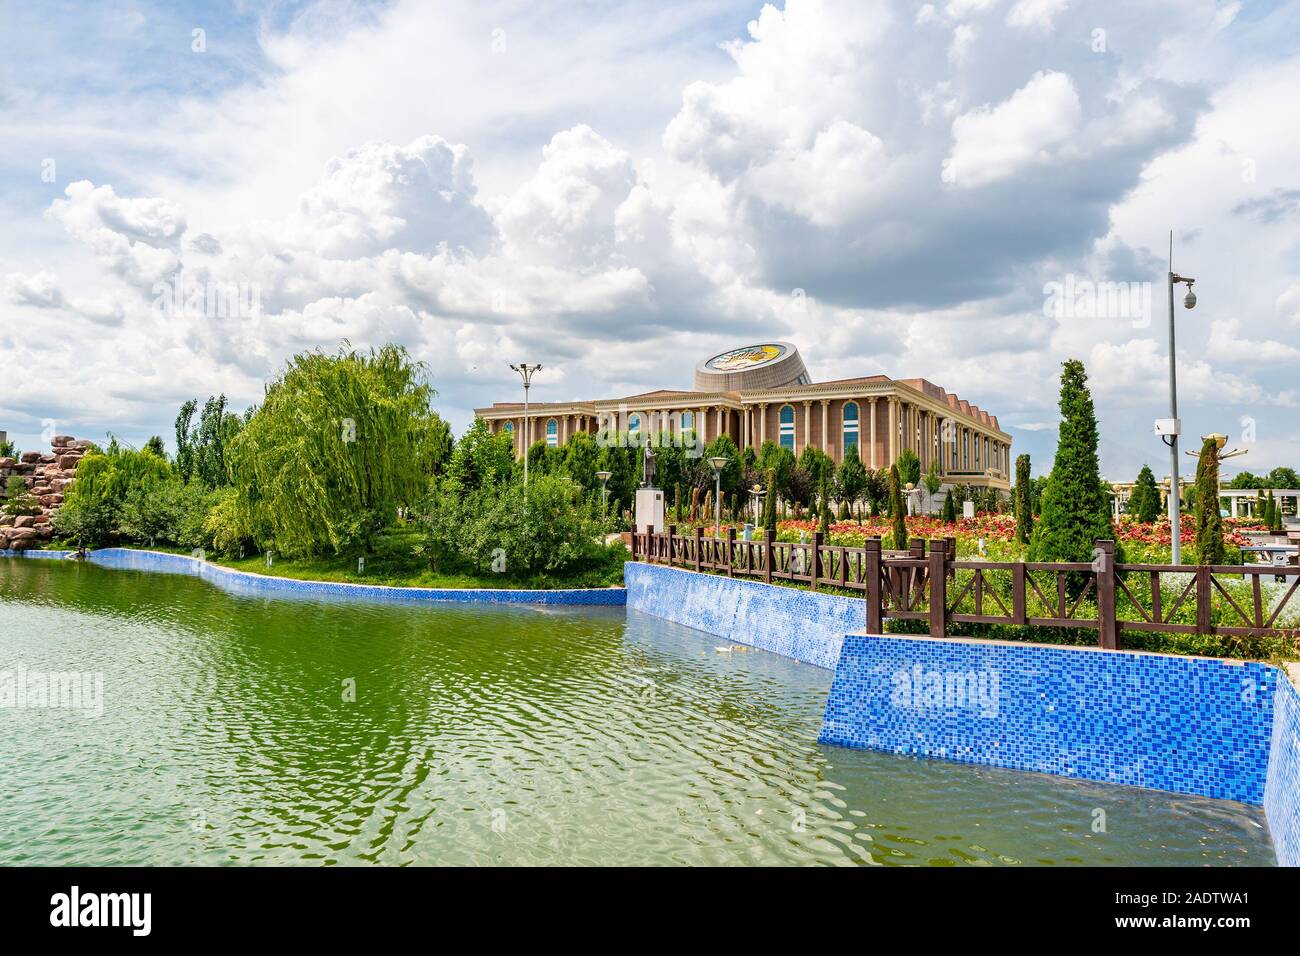 Dushanbe Flag Pole Park Picturesque View of Lake and Tajikistan National Museum on a Cloudy Blue Sky Day Stock Photo